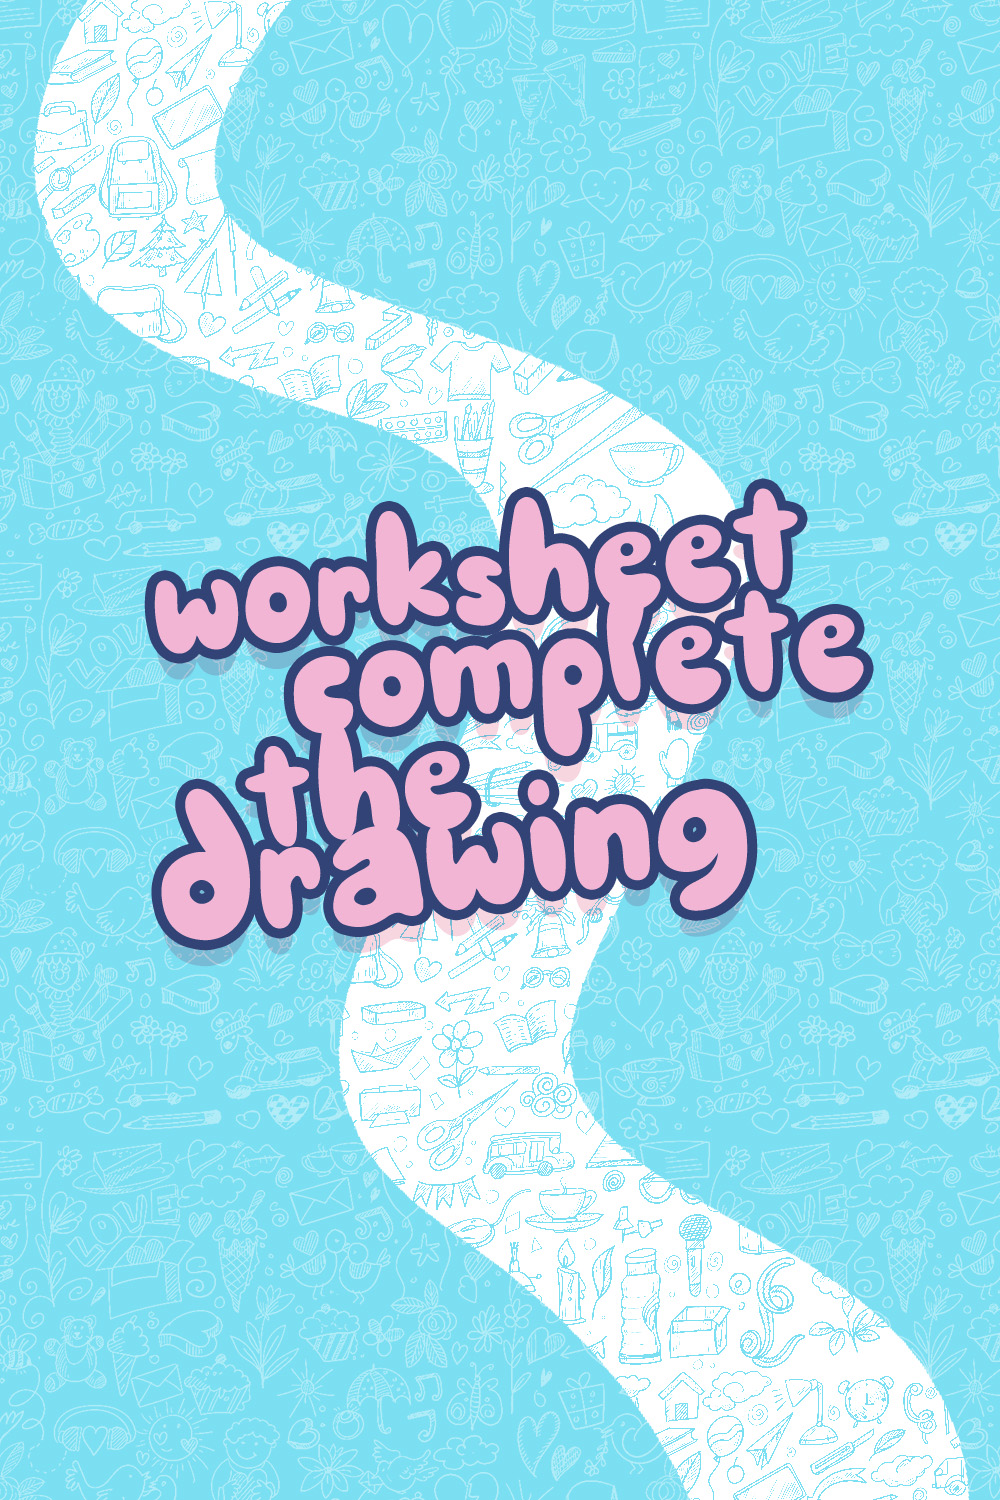 Worksheets Complete the Drawing